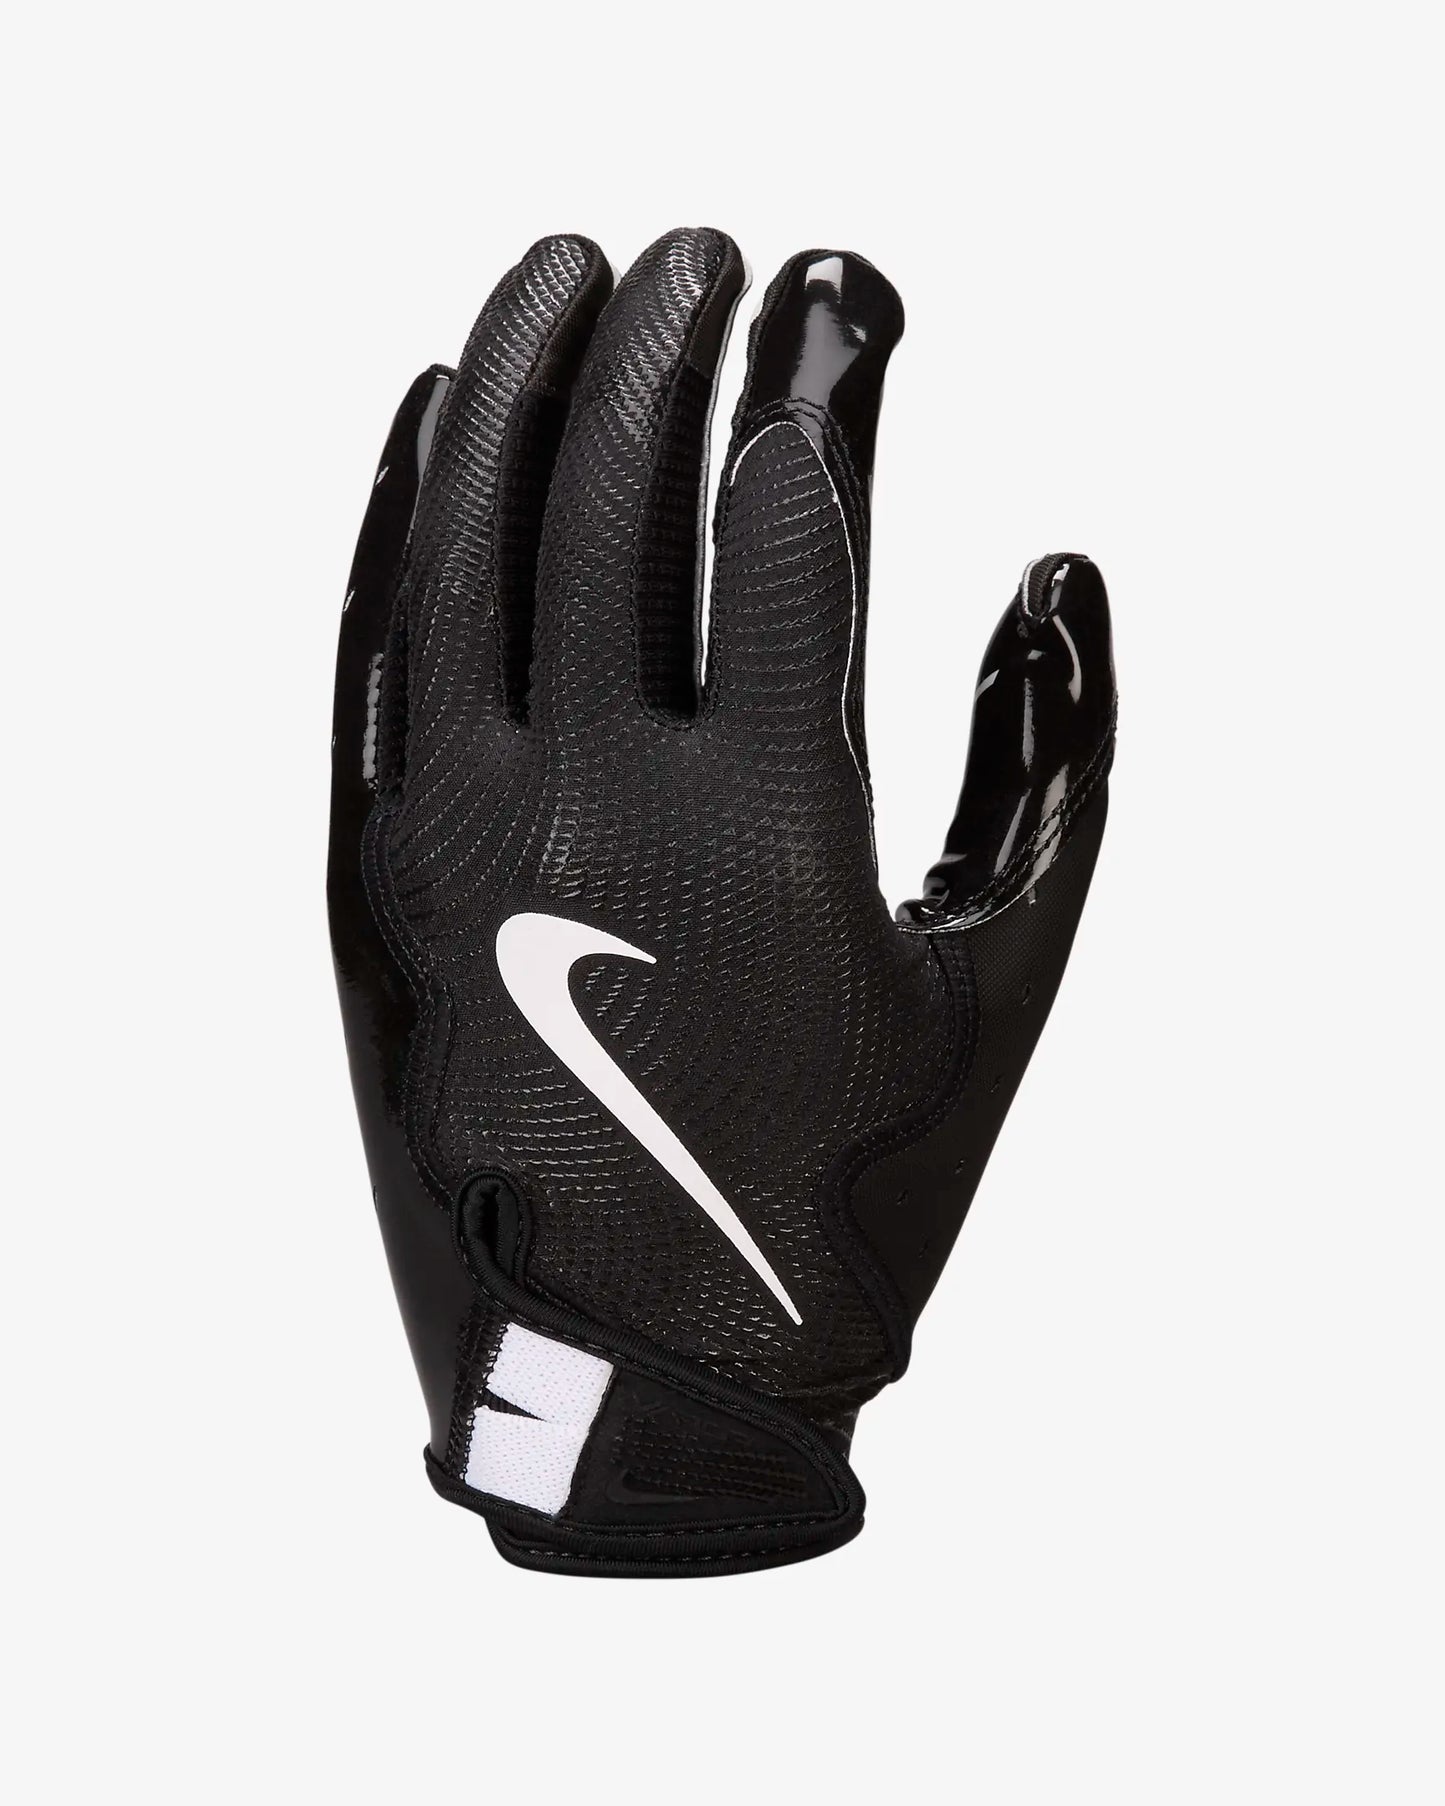 A photo of the Nike Vapor Jet 8.0 Football Gloves in colour black with white nike check